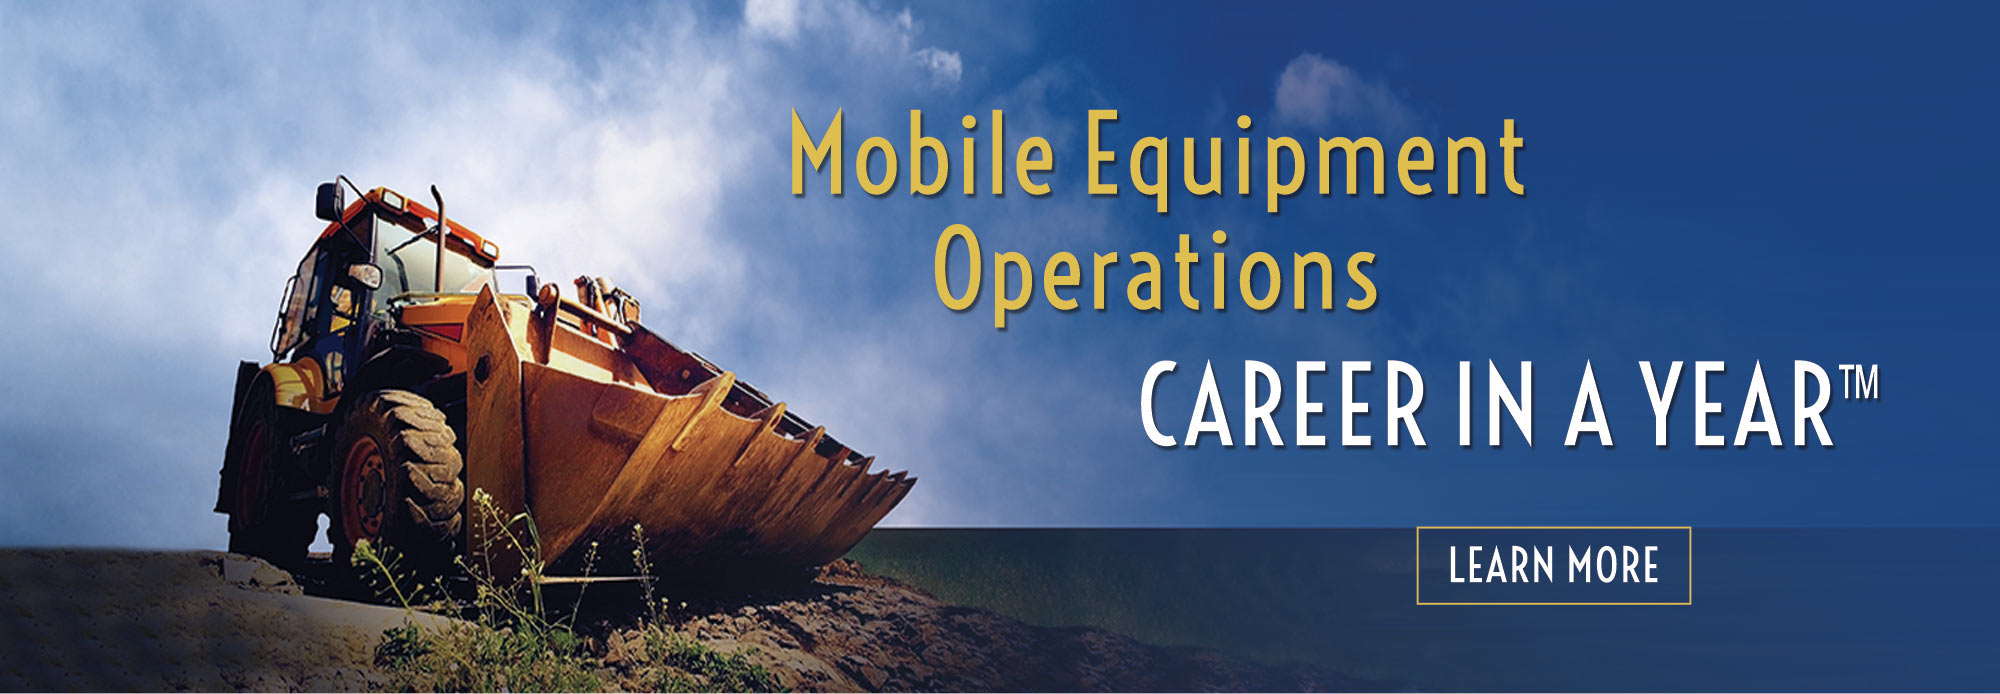 Mobile Equipment operations Career in a Year